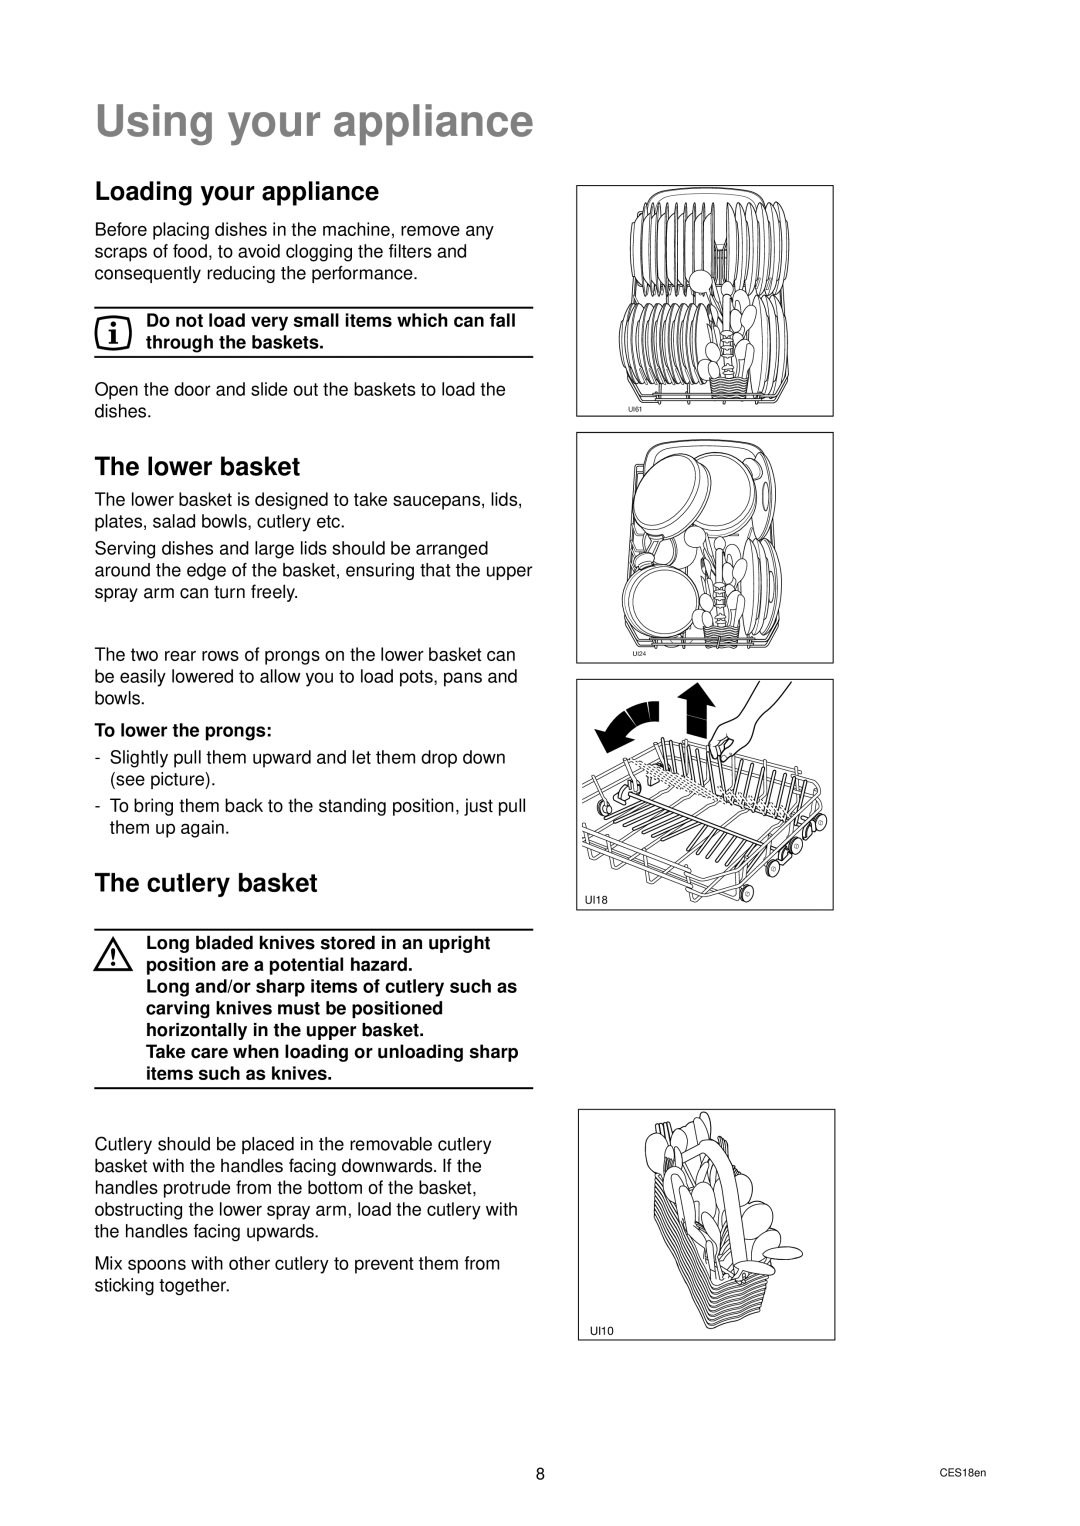 Zanussi DWS 39 manual Using your appliance, Loading your appliance, The lower basket, The cutlery basket 